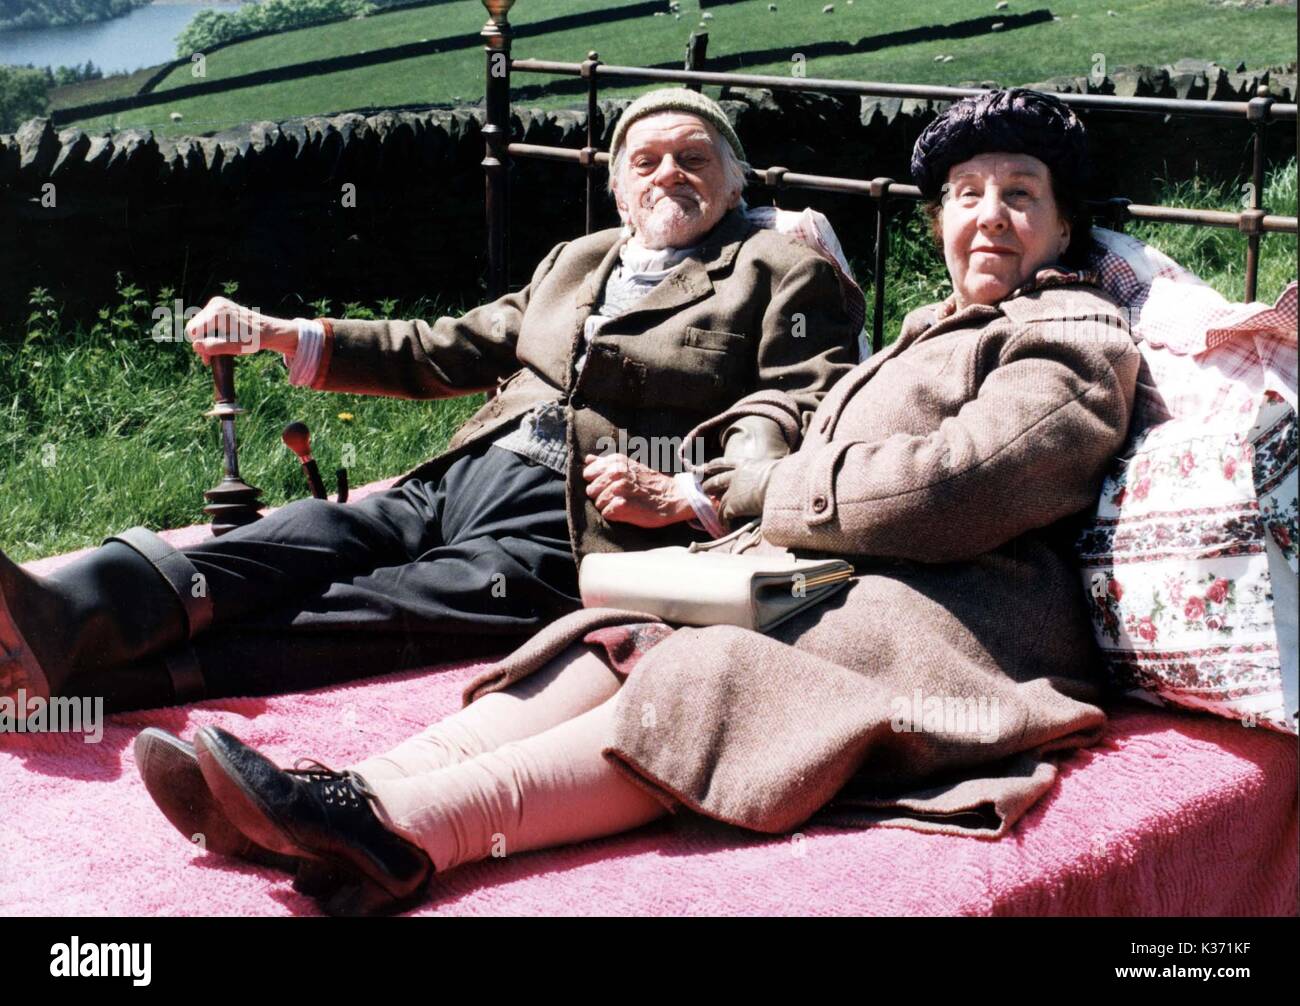 LAST OF THE SUMMER WINE BILL OWEN as Compo, KATHY STAFF as Nora Batty seen in 1997 LAST OF THE SUMMER WINE Stock Photo